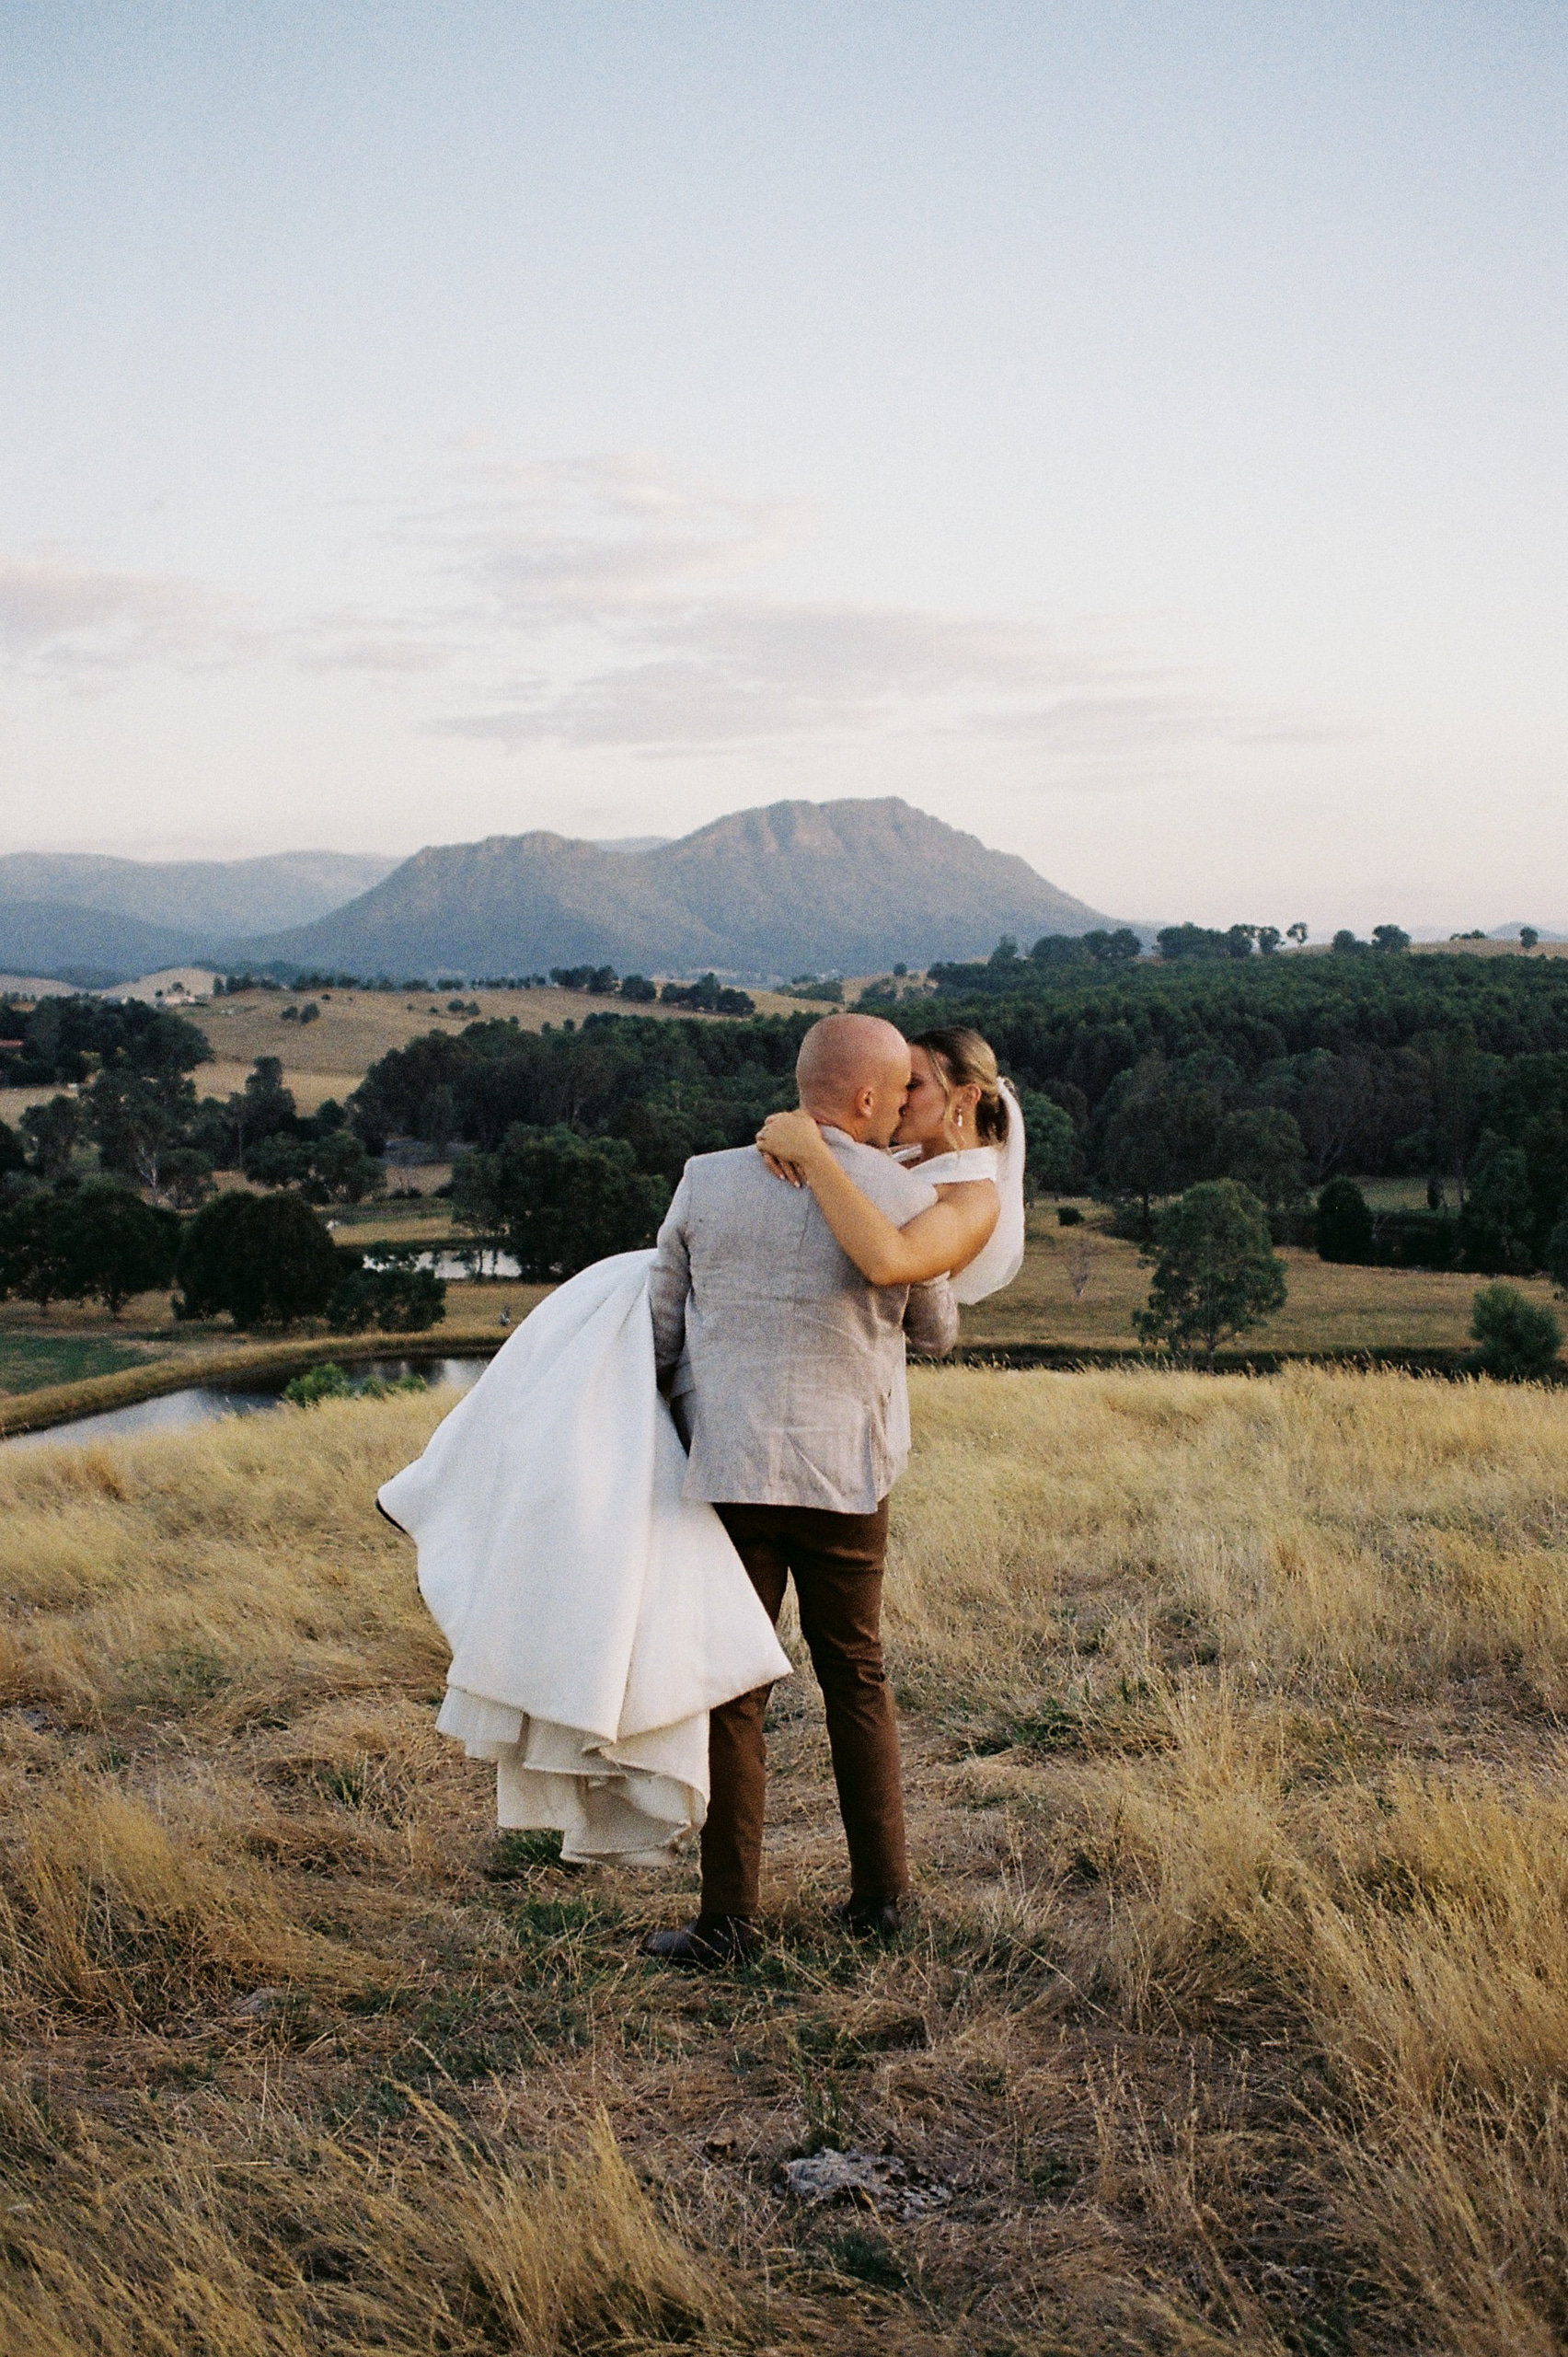 Ryley and Brandan's Bonfire Station Farmstay and Microbrewery Weddings photographed by Weddings by Hayden